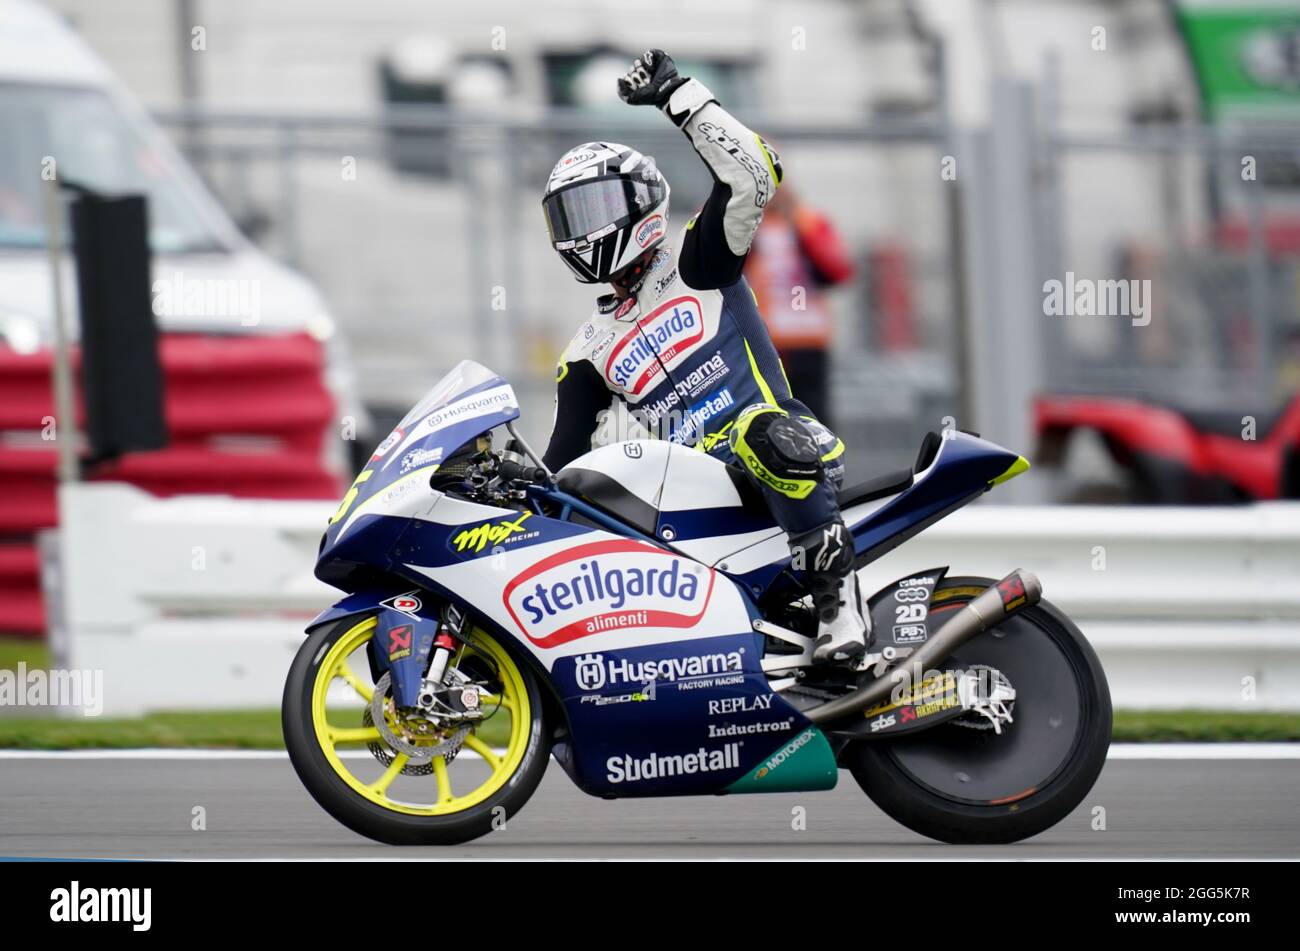 Sterilgarda Max Racing Team's Romano Fenati celebrates after winning the  MotoGP 3 during the Monster Energy British Grand Prix MotoGP race day at  Silverstone, Towcester. Picture date: Sunday August 29, 2021 Stock Photo -  Alamy